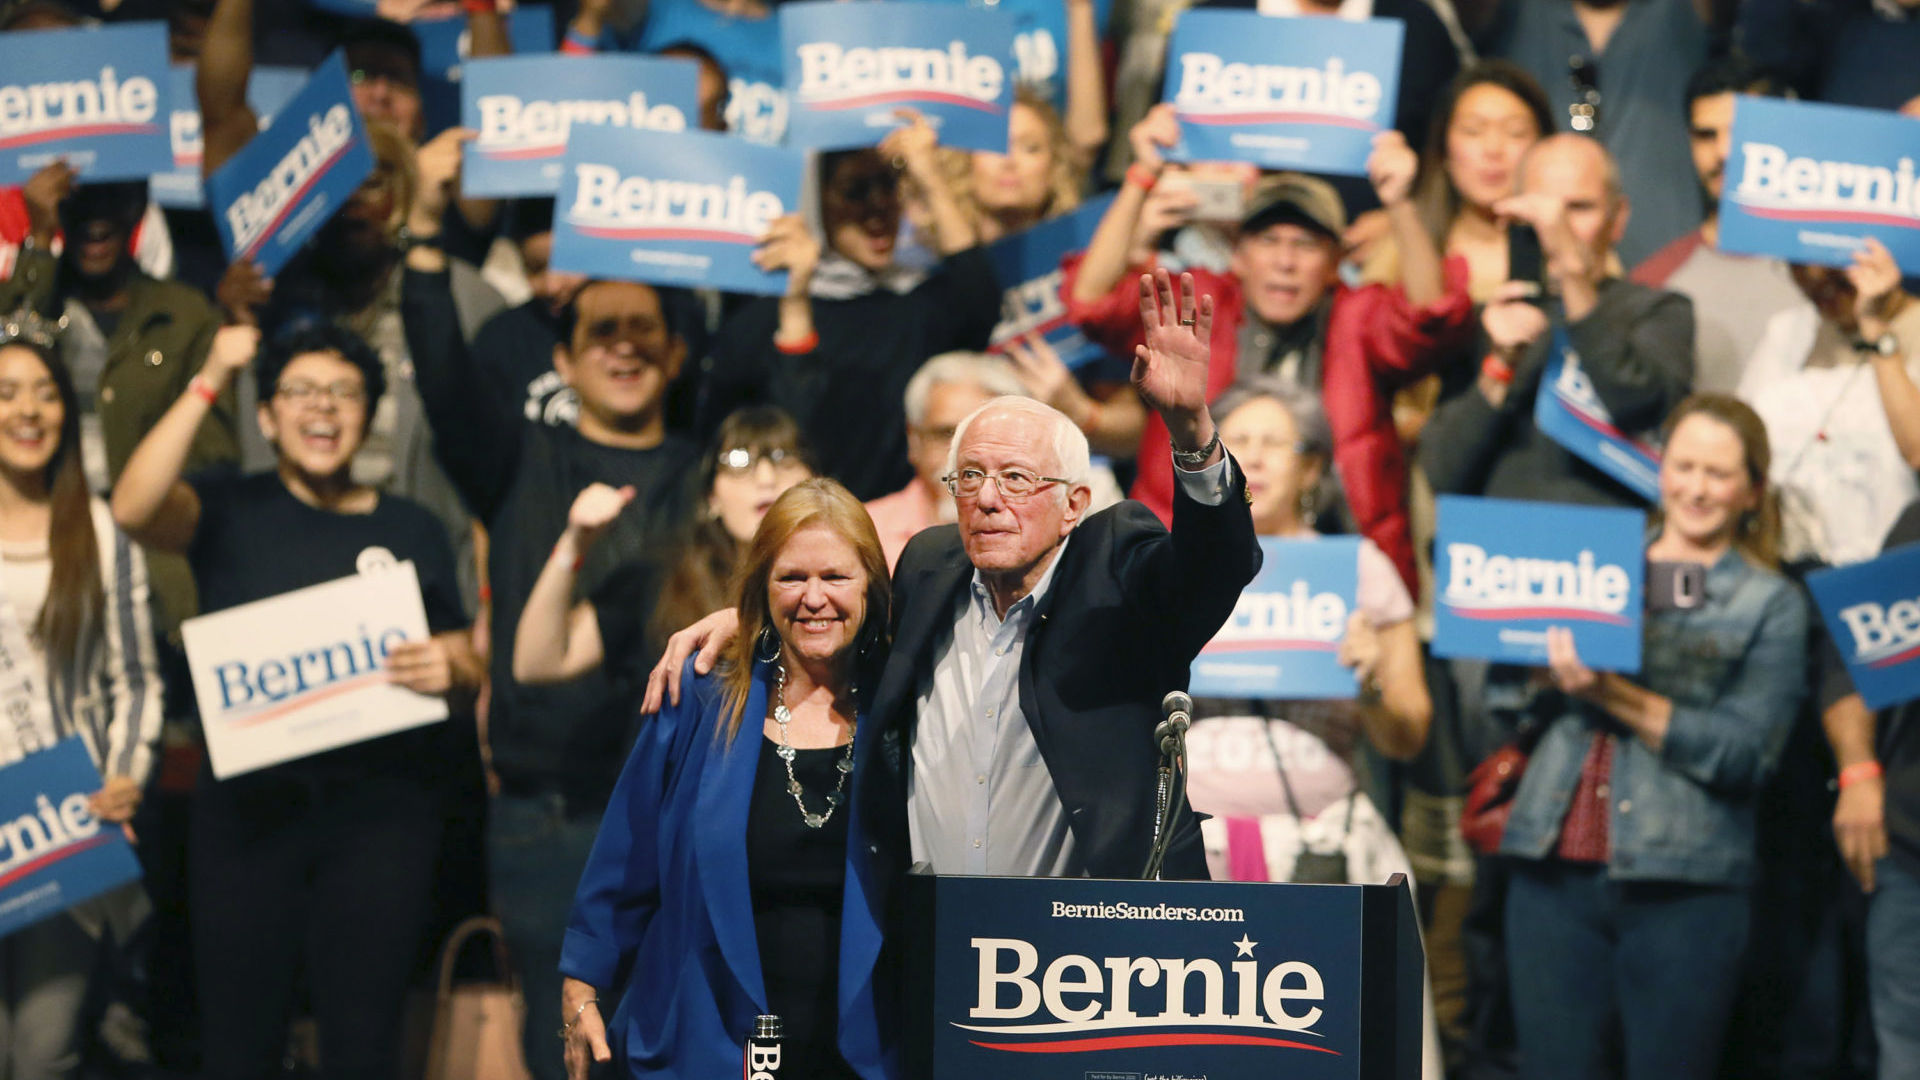 Bernie and Jane Sanders after a victory speech in San Antonio, February 22, 2020 (AP / Eric Gay).